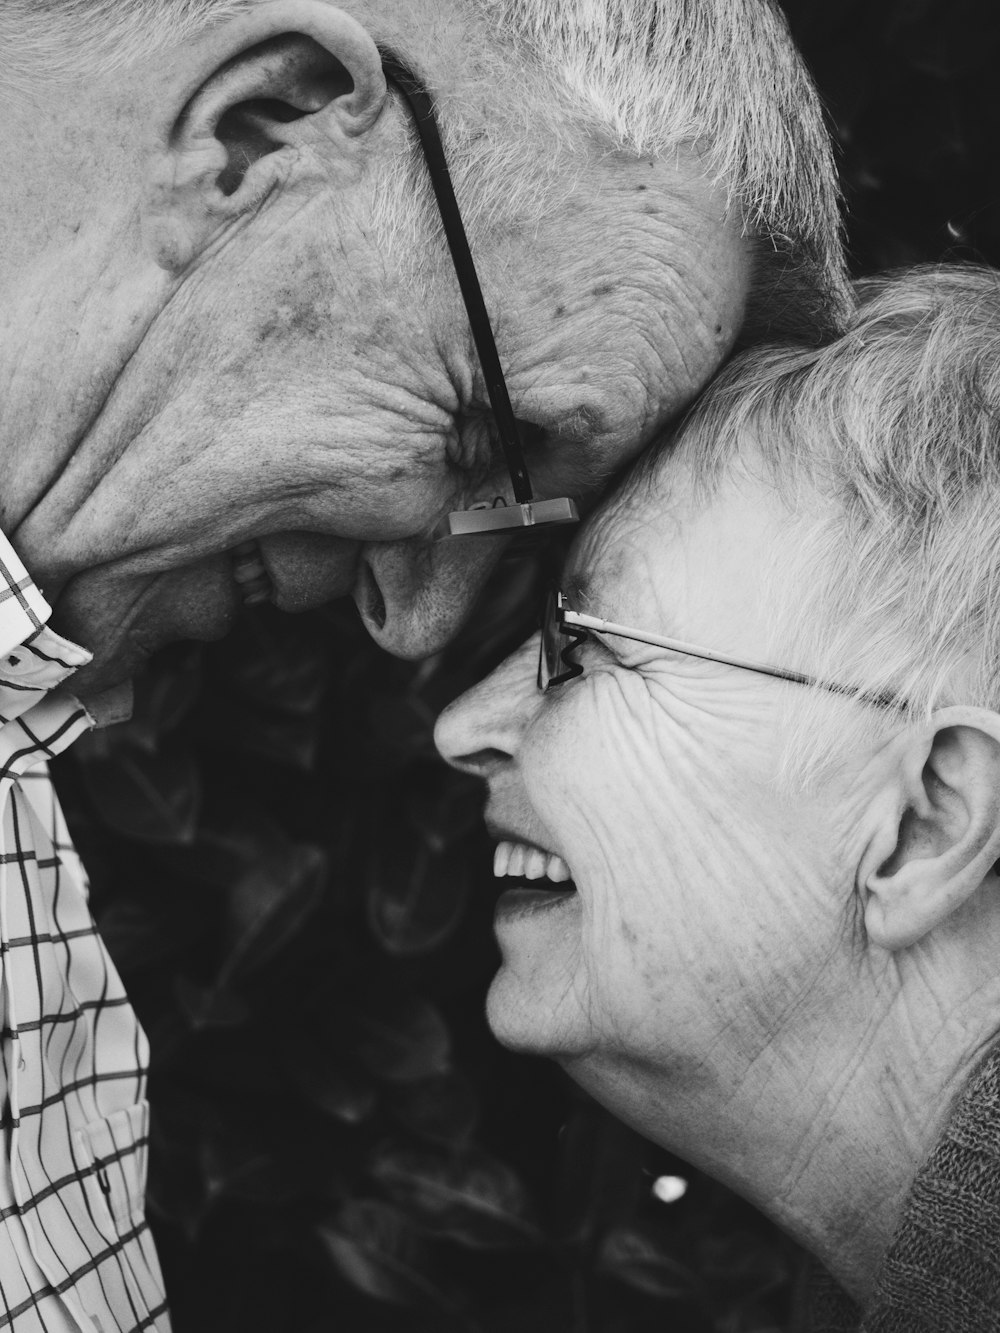 Elderly man and woman touch foreheads in black and white photo